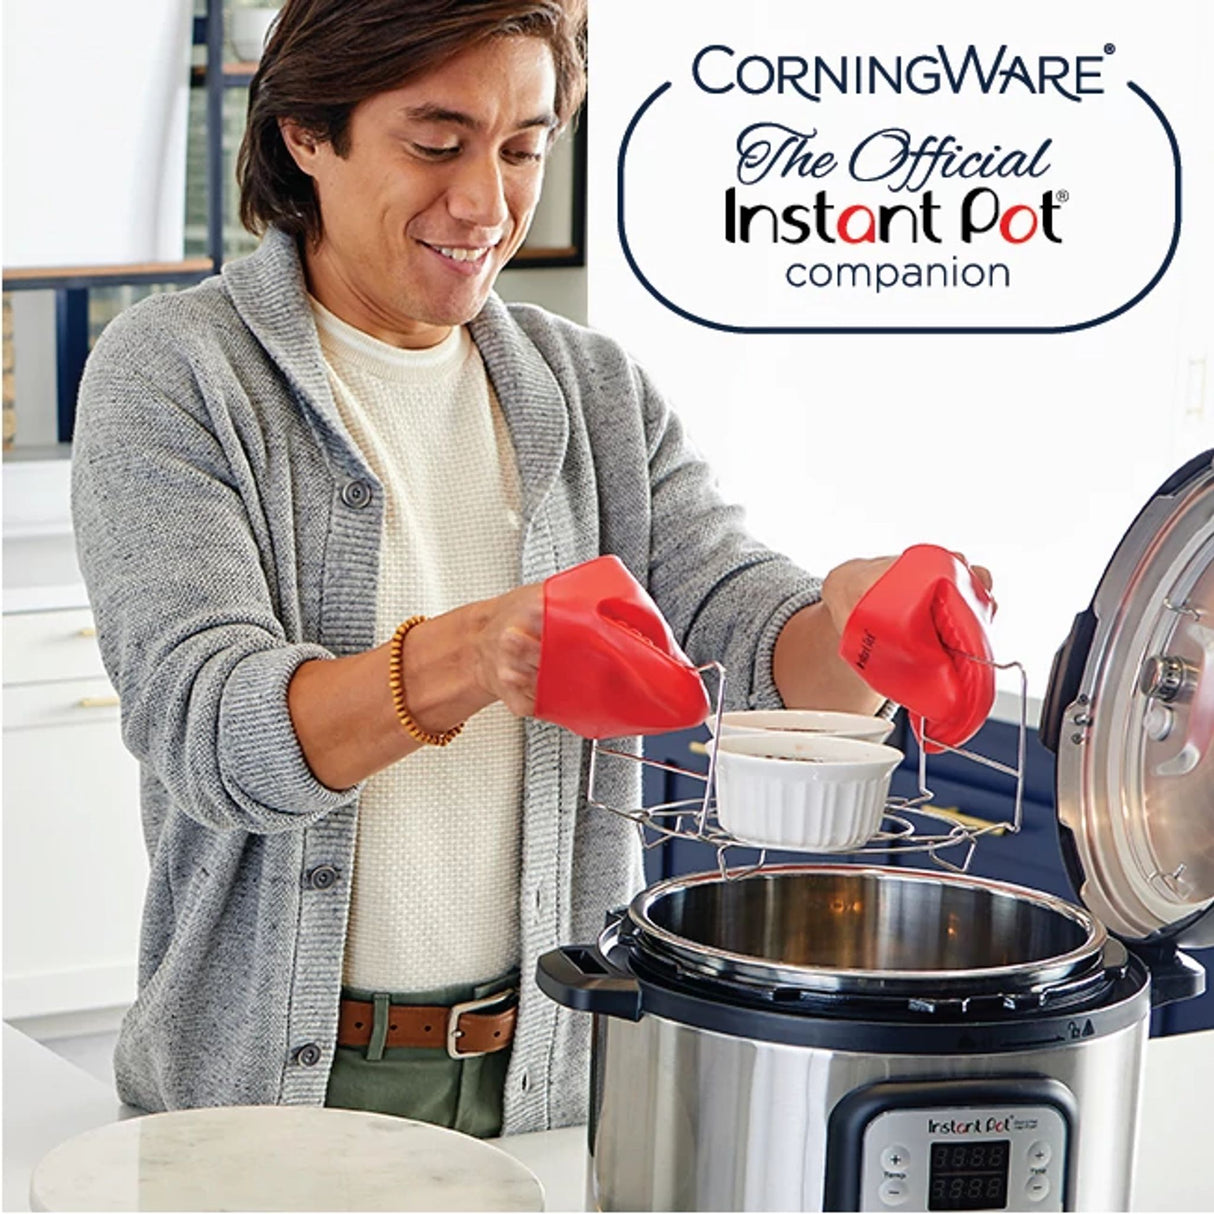  French White 6-piece Bakeware Set photo of using CorningWare in Instant Pot